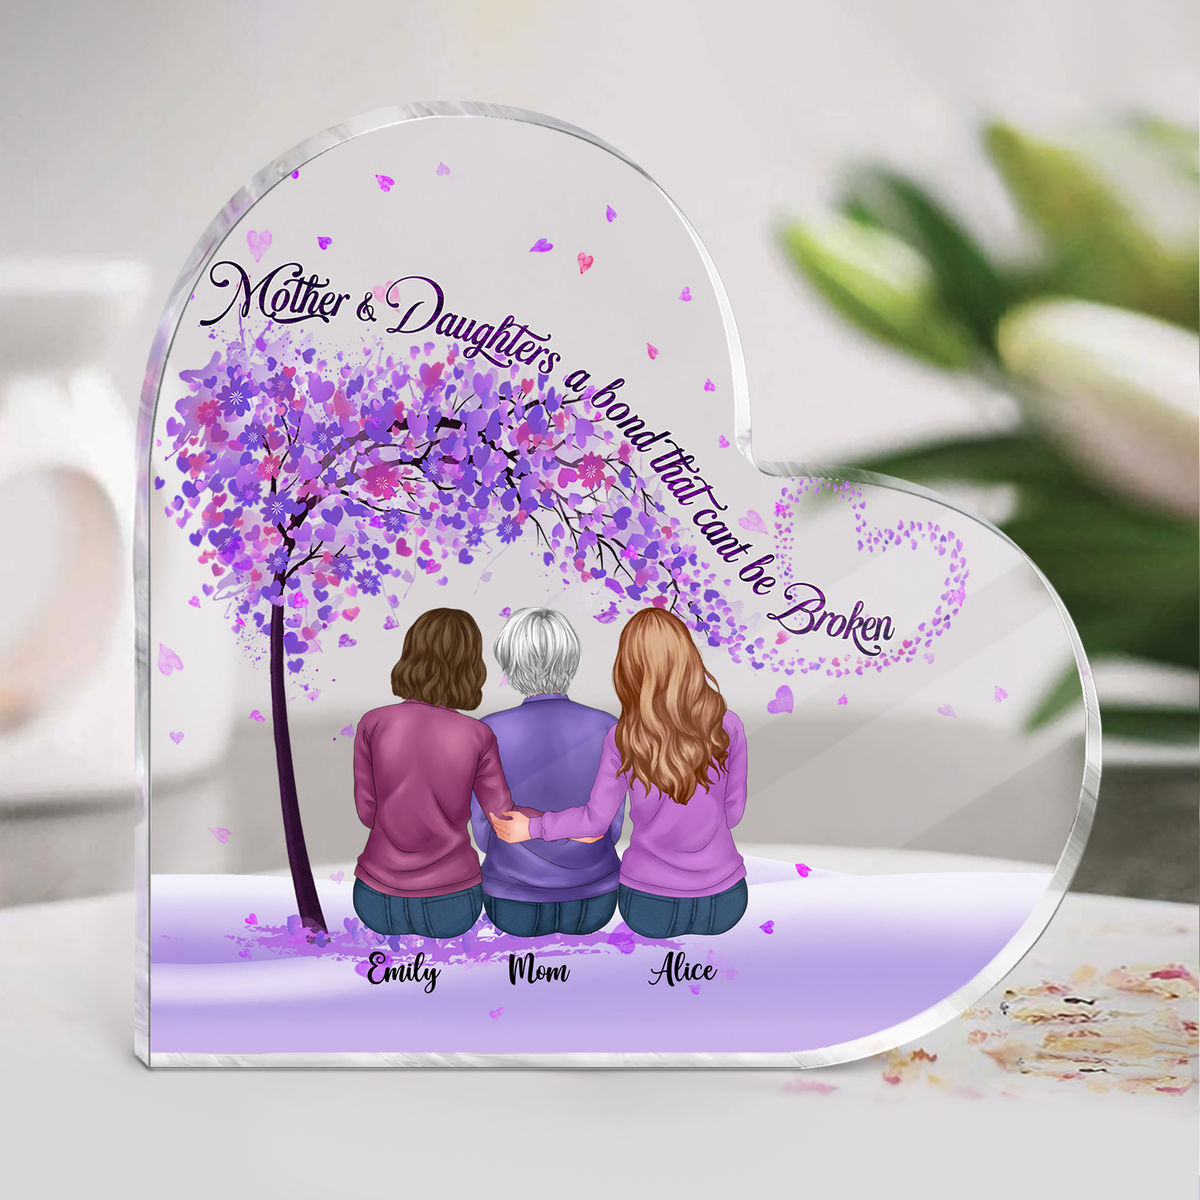 Personalized Desktop - Gifts For Mom - Mother and Daughters a bond that can't be broken - Xmas, Mother's Day, Birthday Gifts